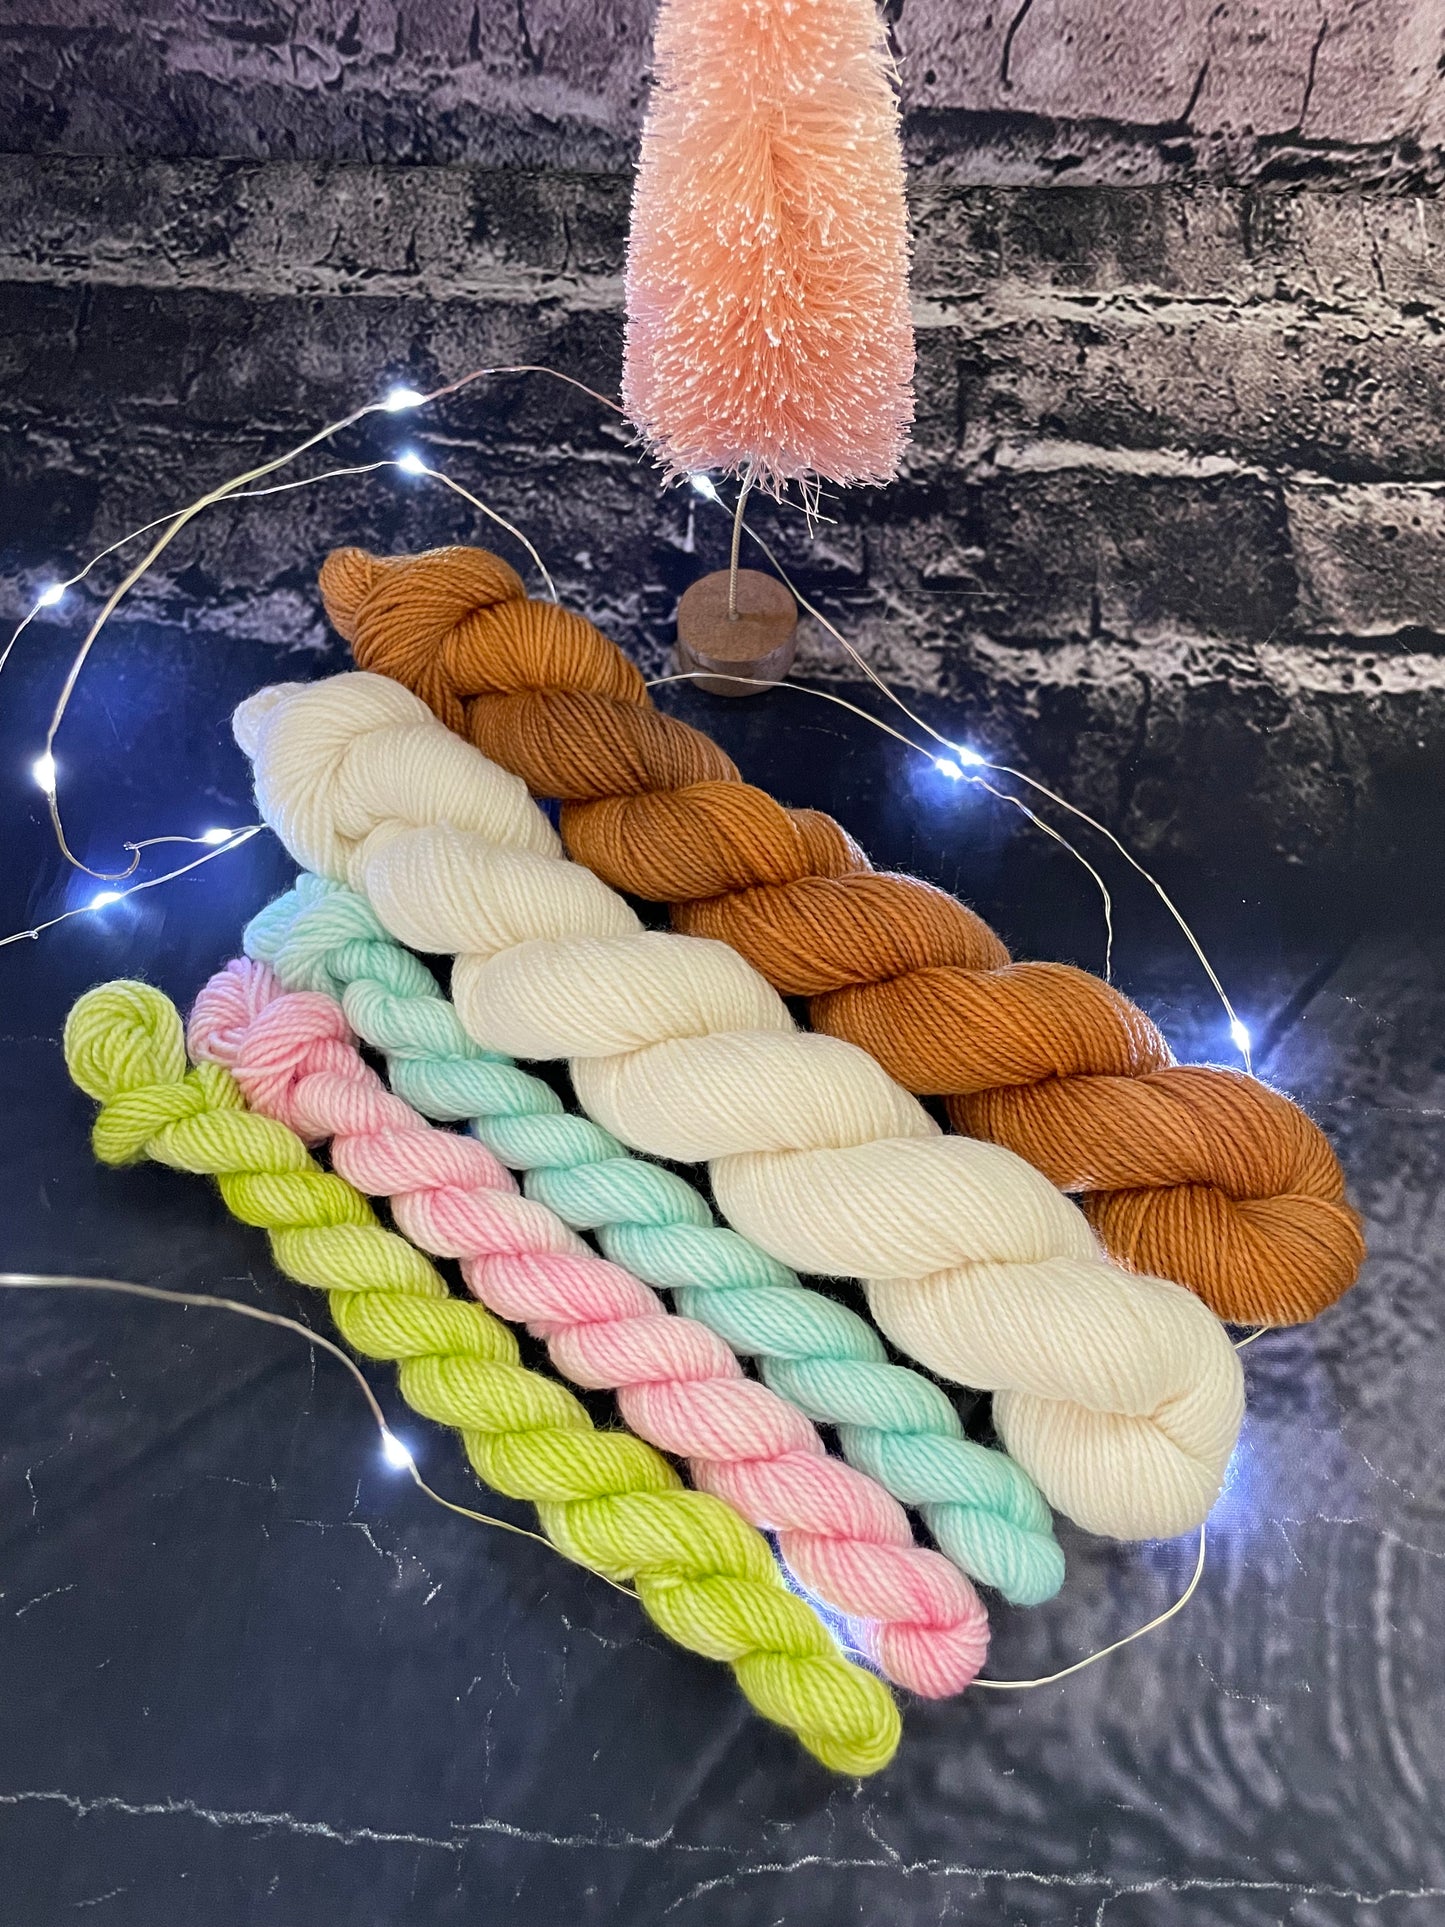 Gingerbread House Sock sets on Lush fingering 2 ply ...please choose set from menu